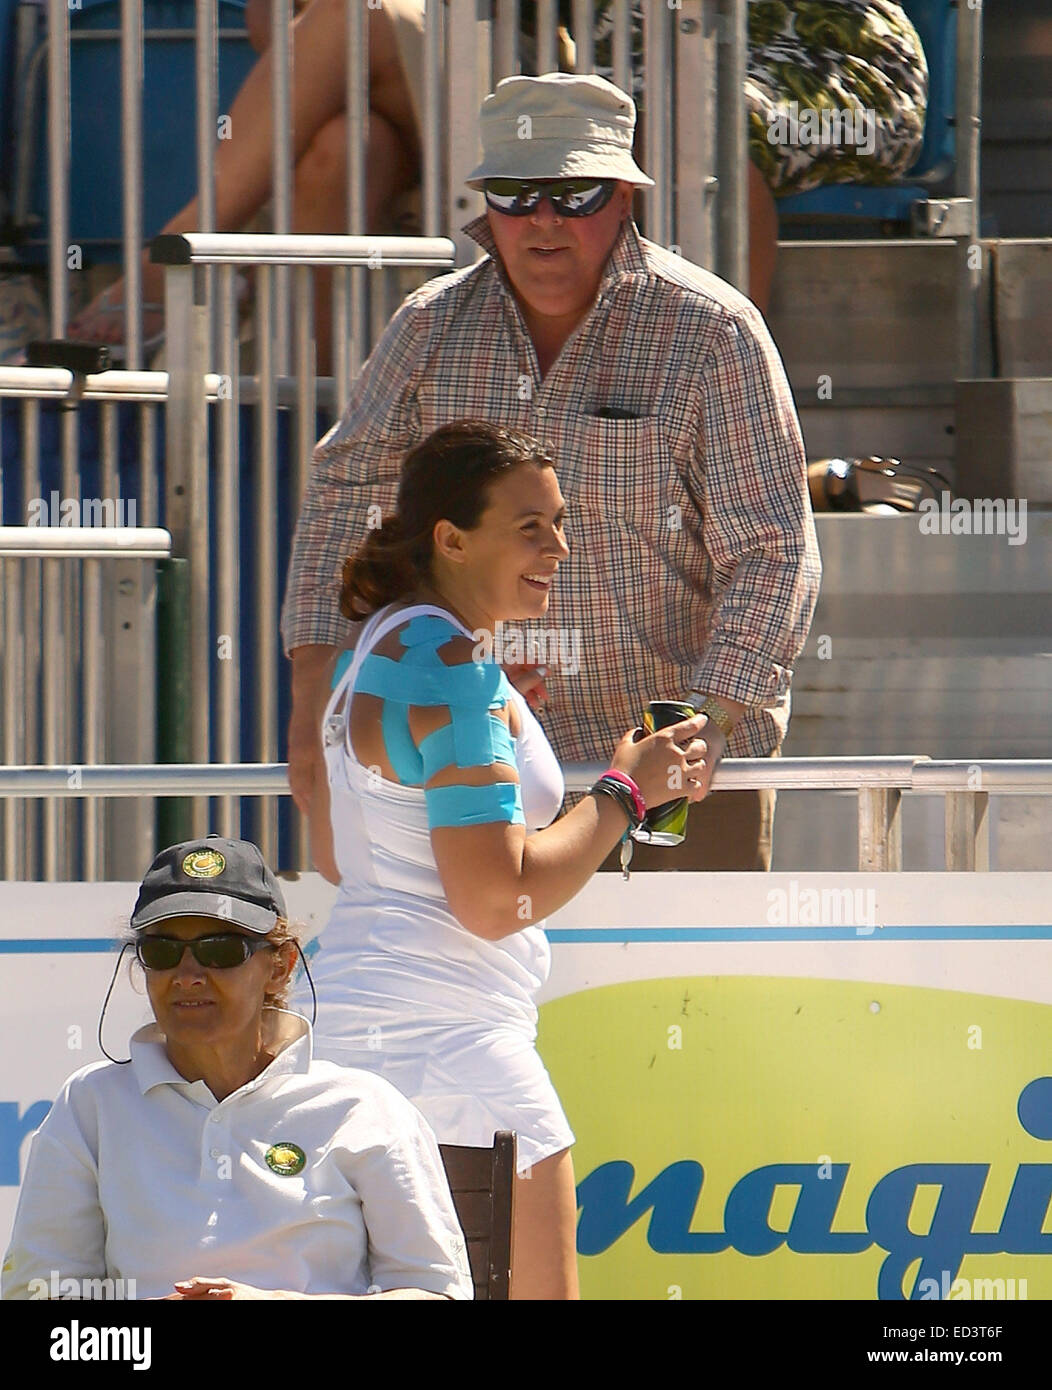 Marion Bartoli cheekily asks a fan if she can have a one of his cans of cider for her tennis partner, former player and Sky pundit Barry Cowan, during their doubles match at the Liverpool Hope University International Tennis Tournament. While Cowan supped Stock Photo